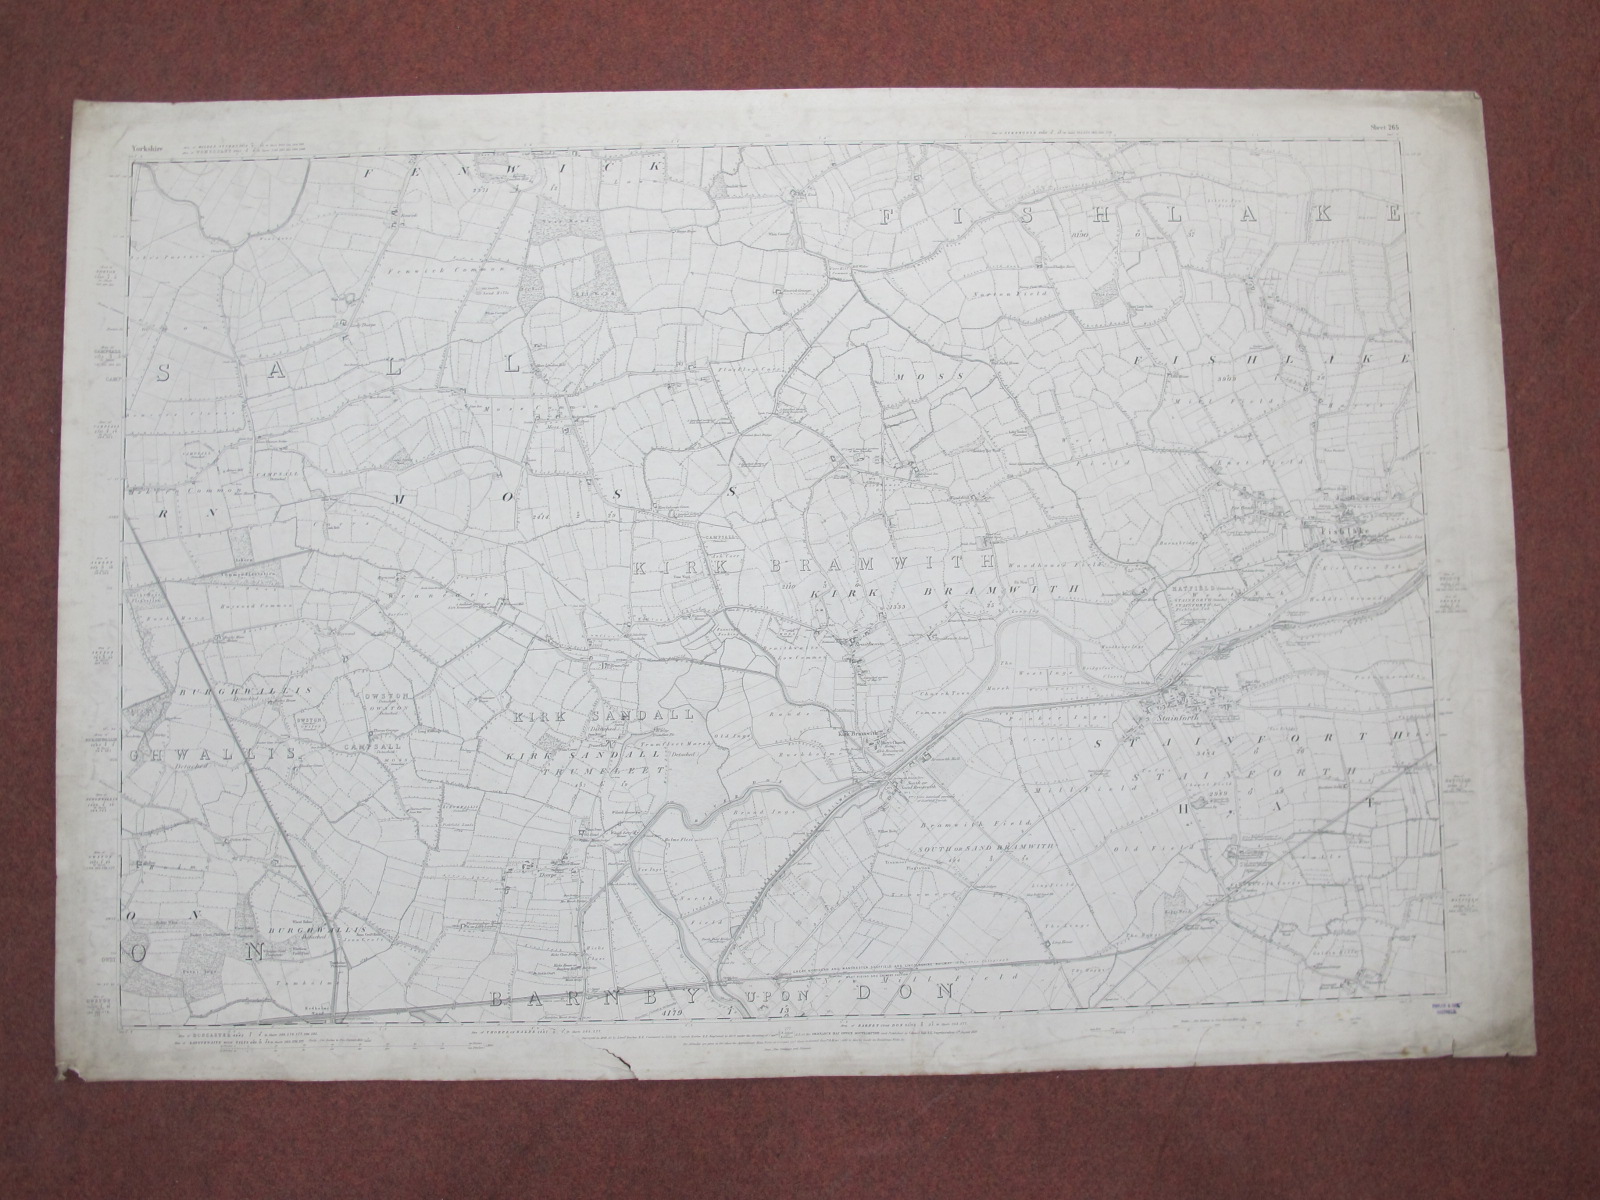 West Riding Yorkshire Maps, Rotherham and area - some dates noted 1902, 1903, 1922, 1935, various - Image 2 of 11